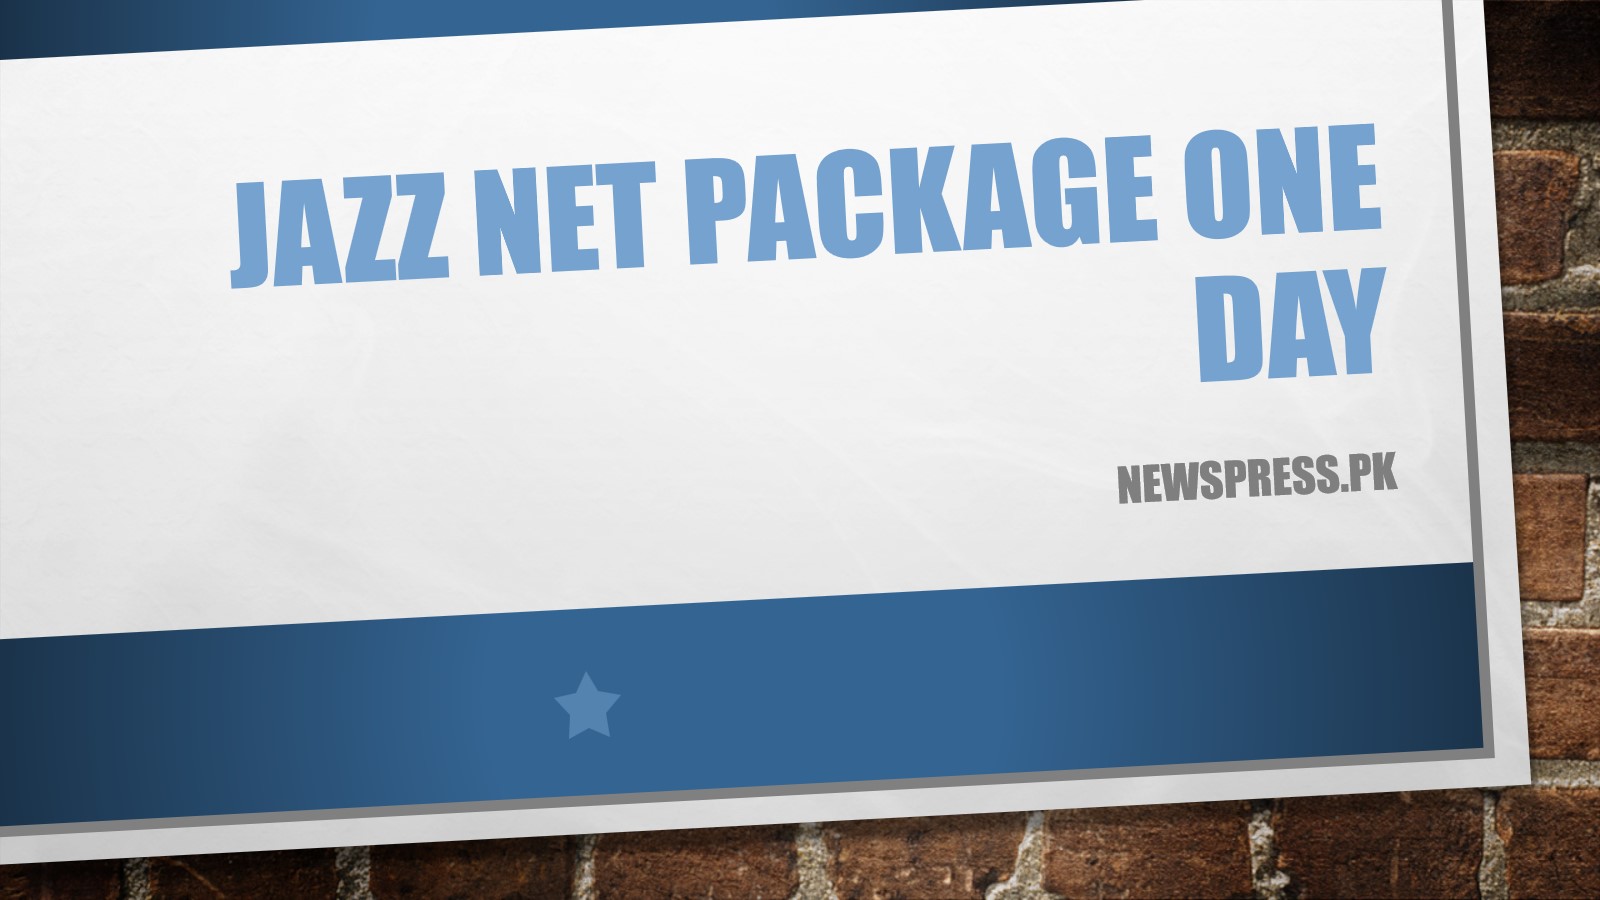 Jazz Net Package One Day